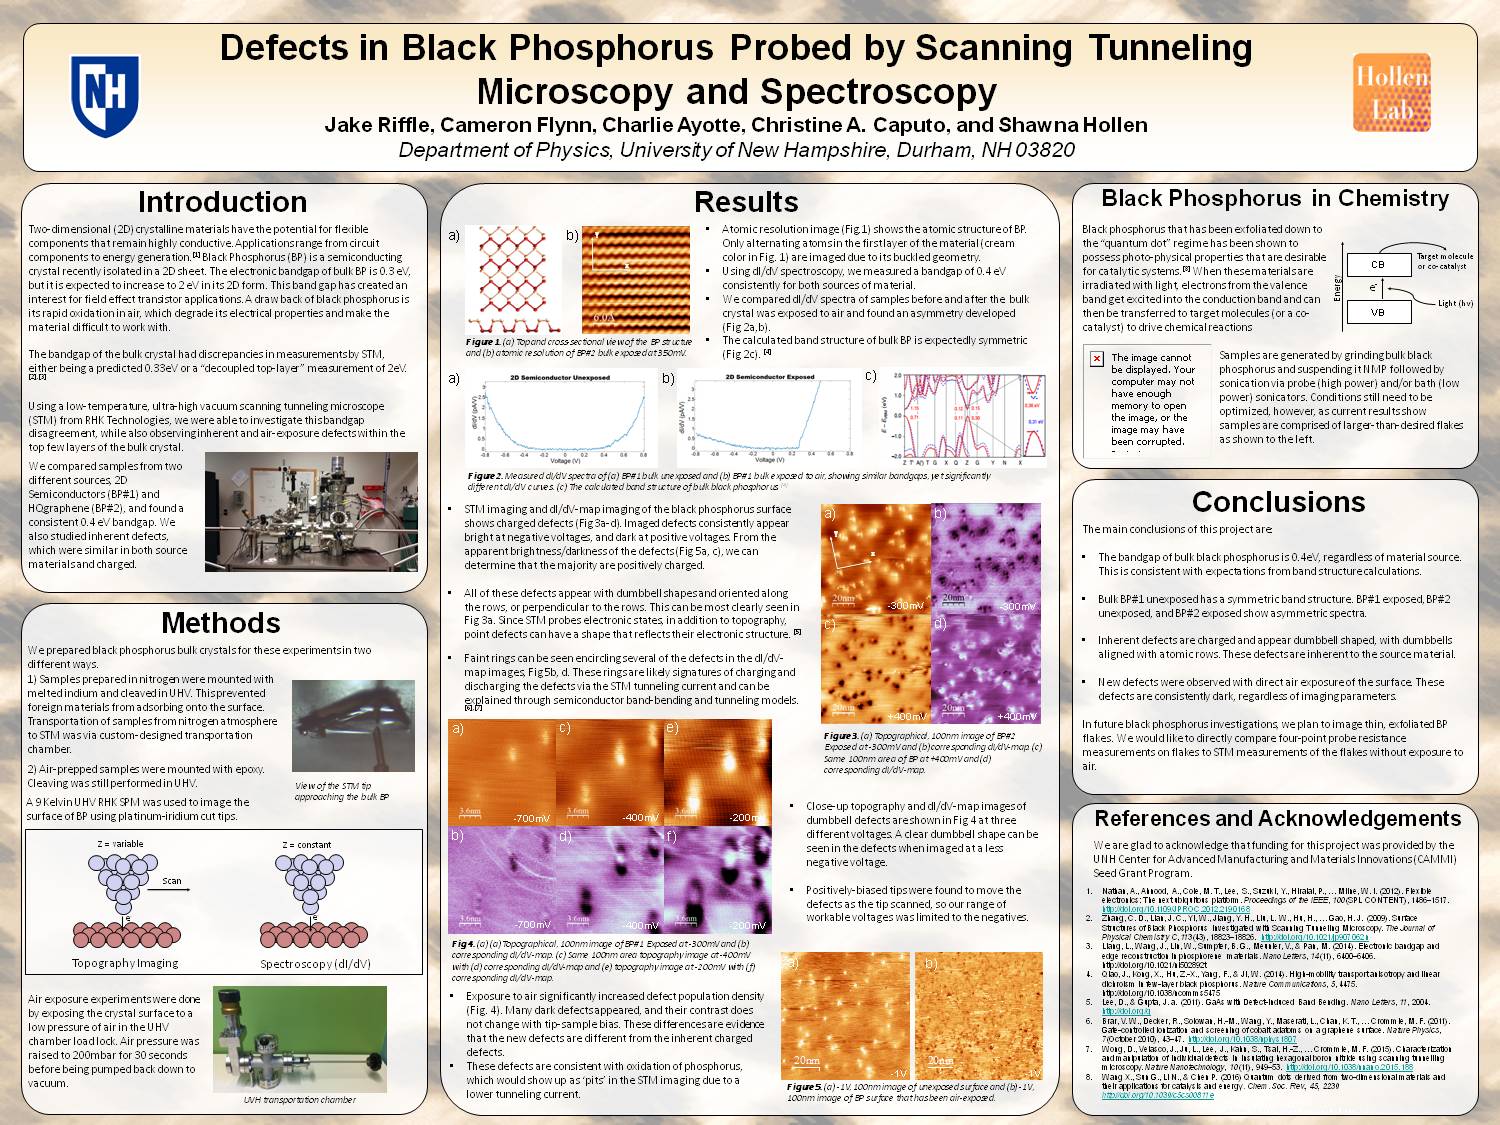 Defects In Black Phosphorus Probed By Scanning Tunneling Microscopy And Spectroscopy by smhollen